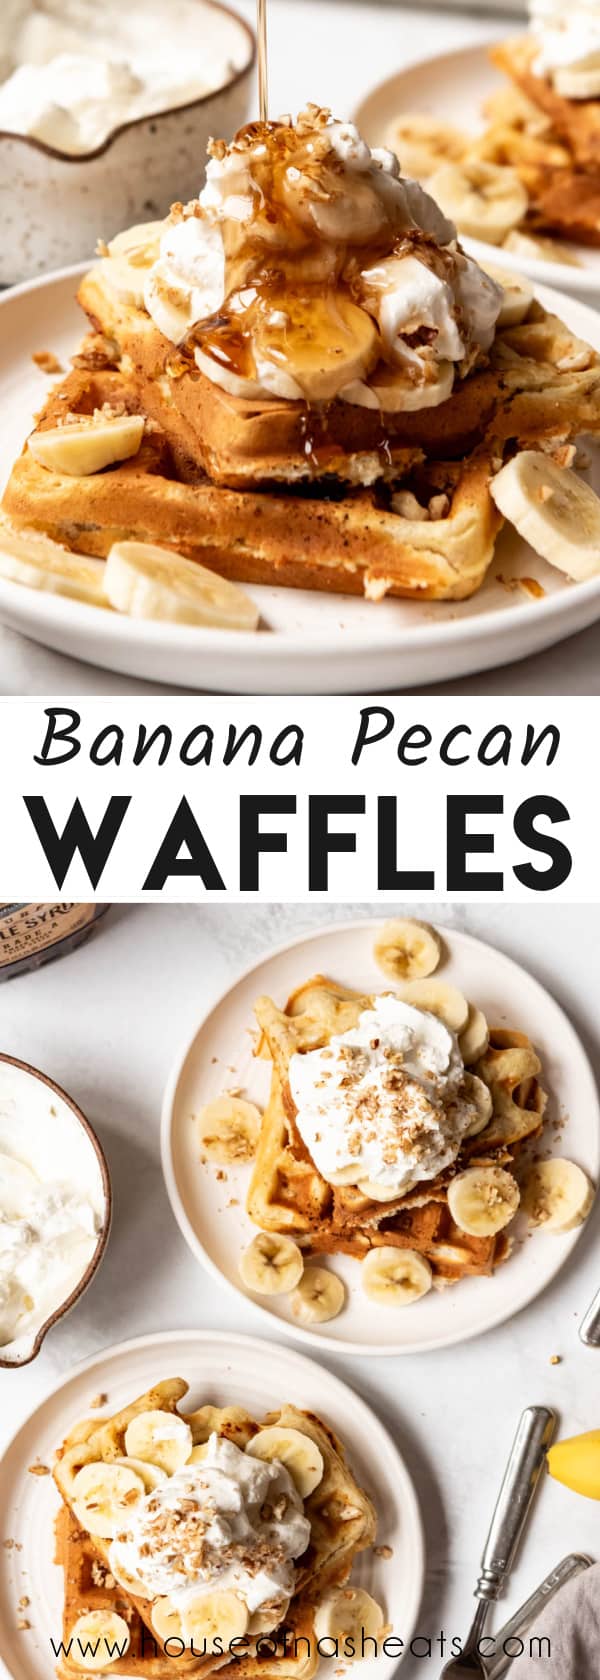 A collage of images of banana pecan waffles with text overlay.